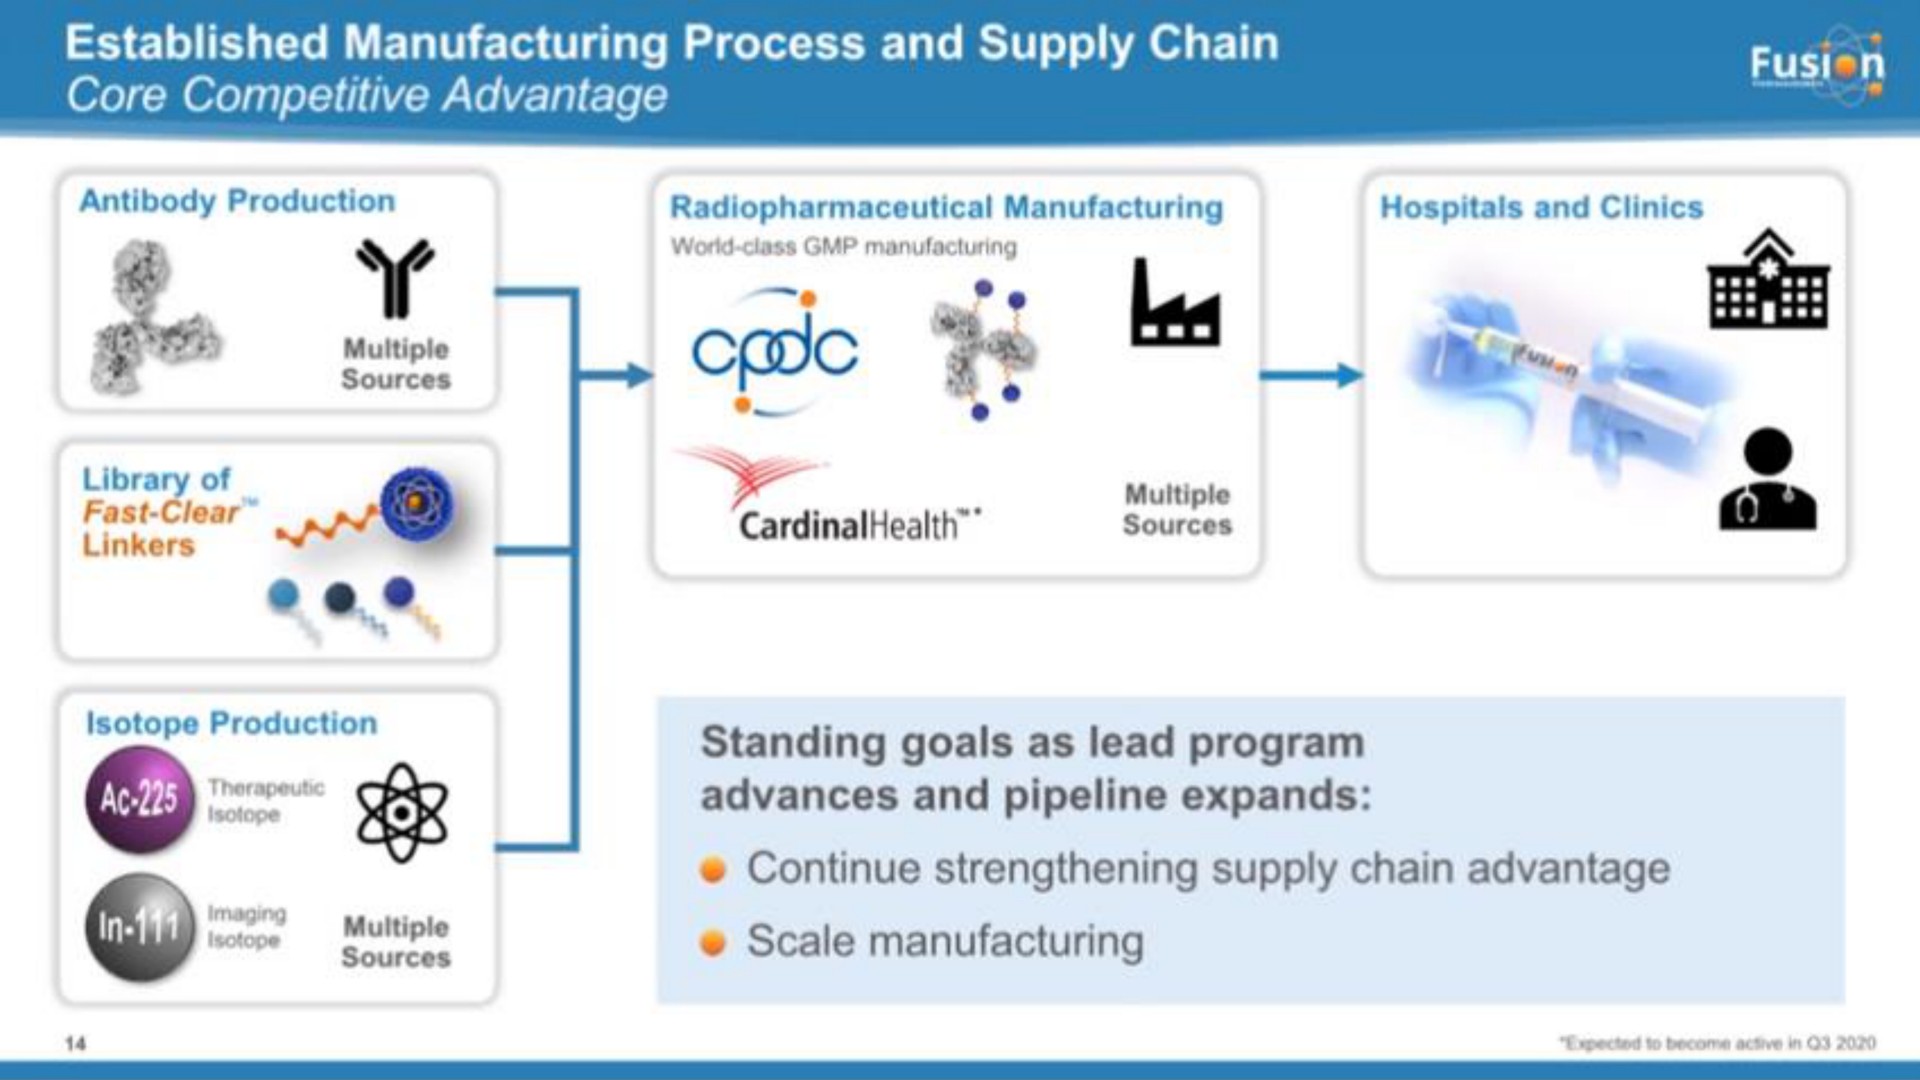 established manufacturing process and supply chain core competitive advantage fast lee i multiple scale manufacturing | Fusion Pharmaceuticals